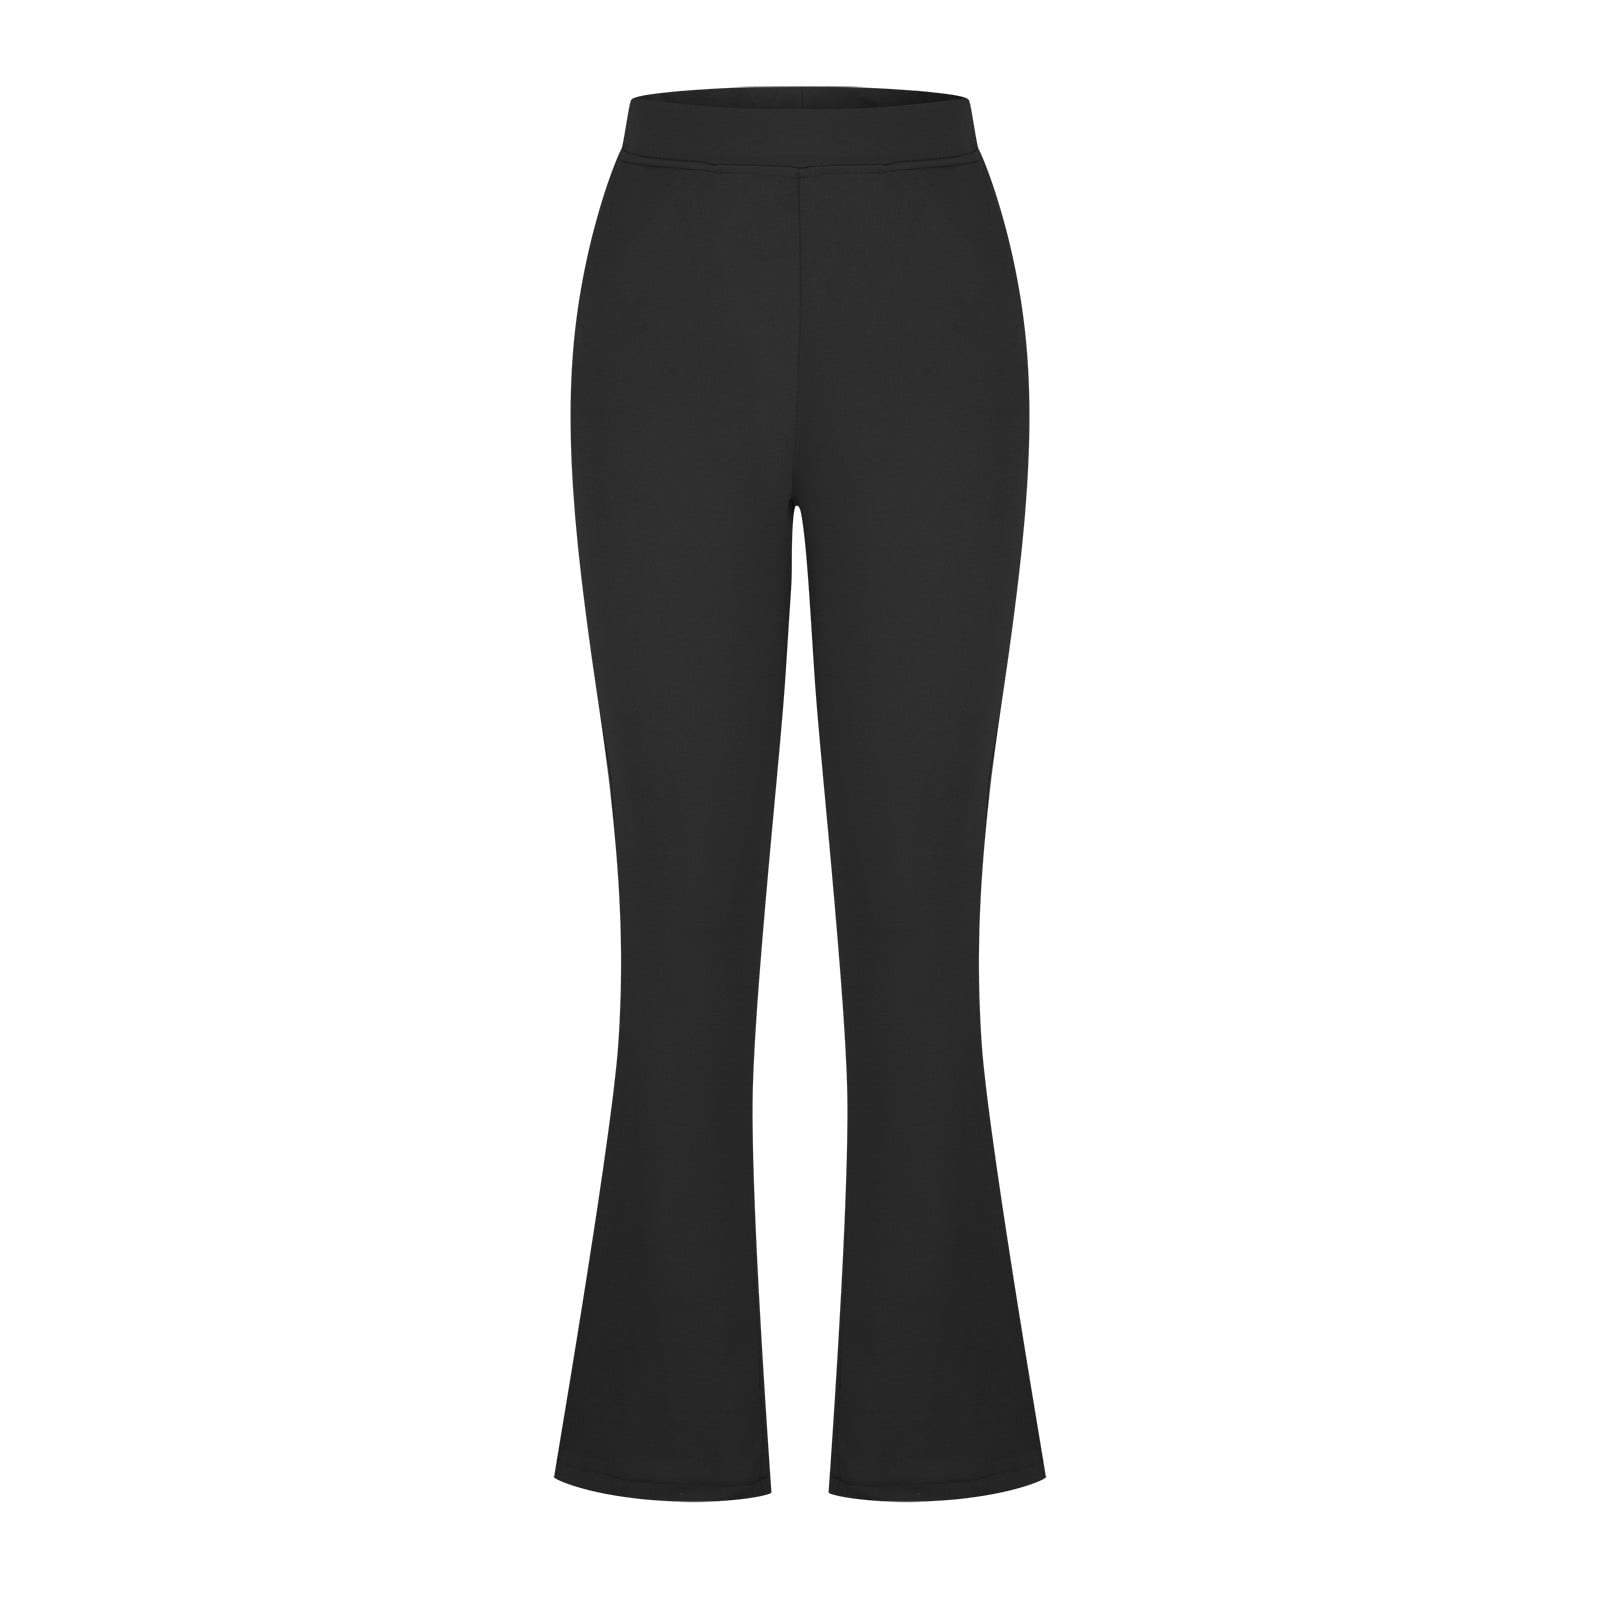 Dressy Split Hem Pants for Women High Wasited Pull On Slim Fit Flare Trousers  Comfy Work Outfits for Office Business(Regular-31 Inseam,Black, XS) at   Women's Clothing store